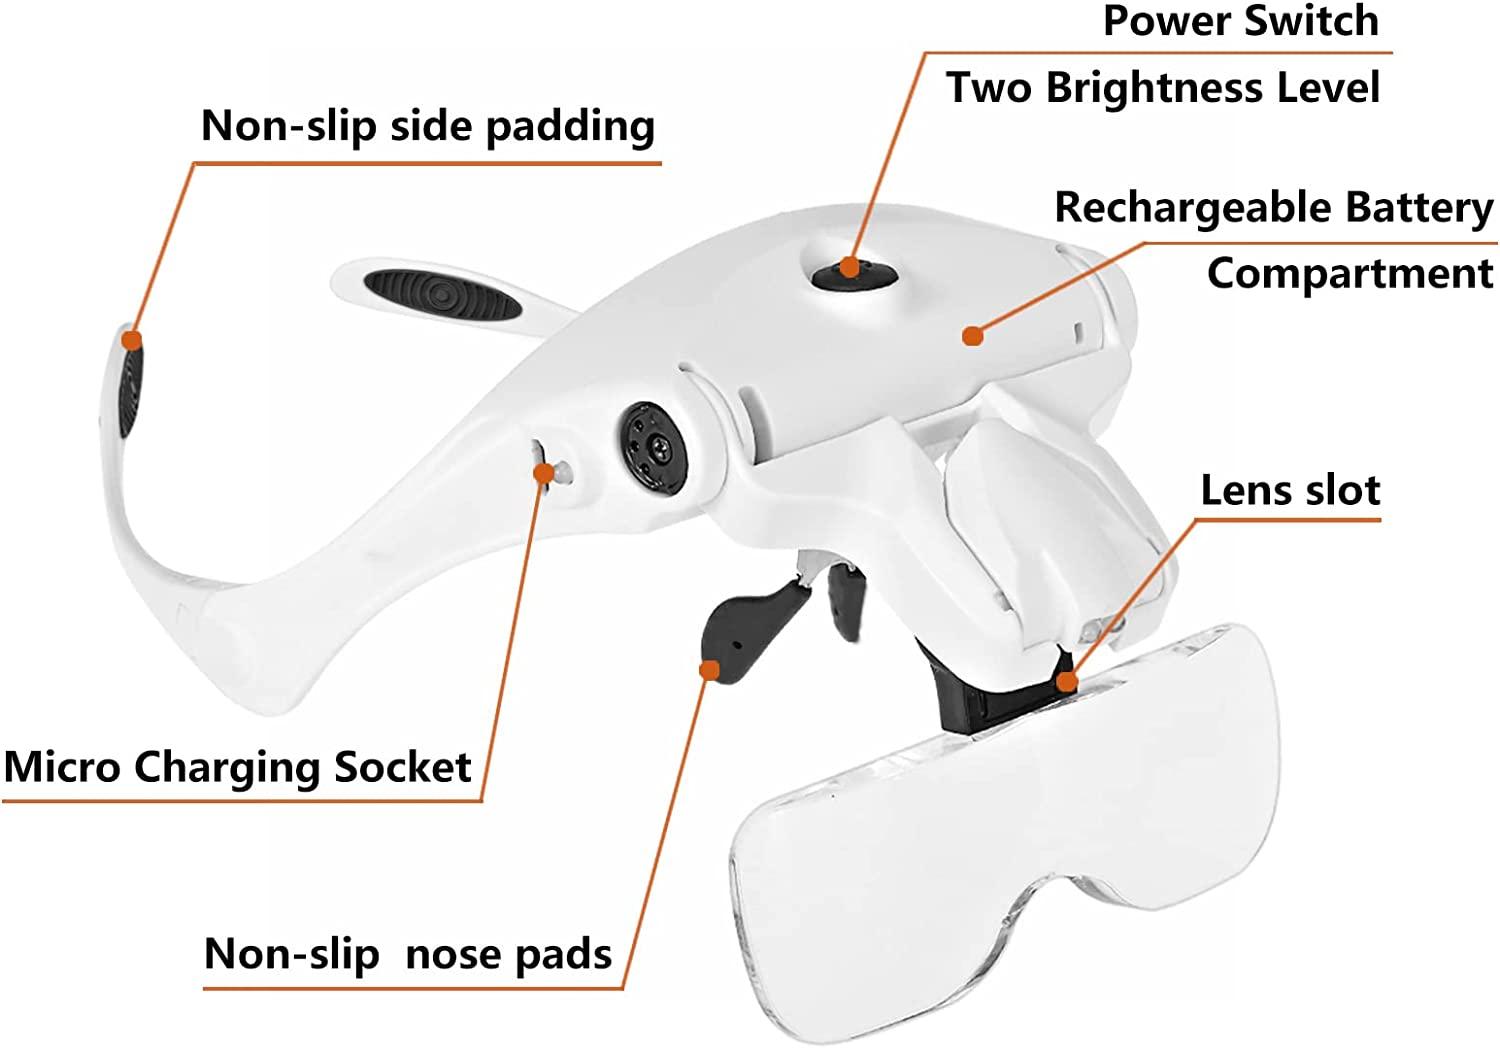 Hands Free Headband Magnifying Glass, USB Charging Head Magnifier